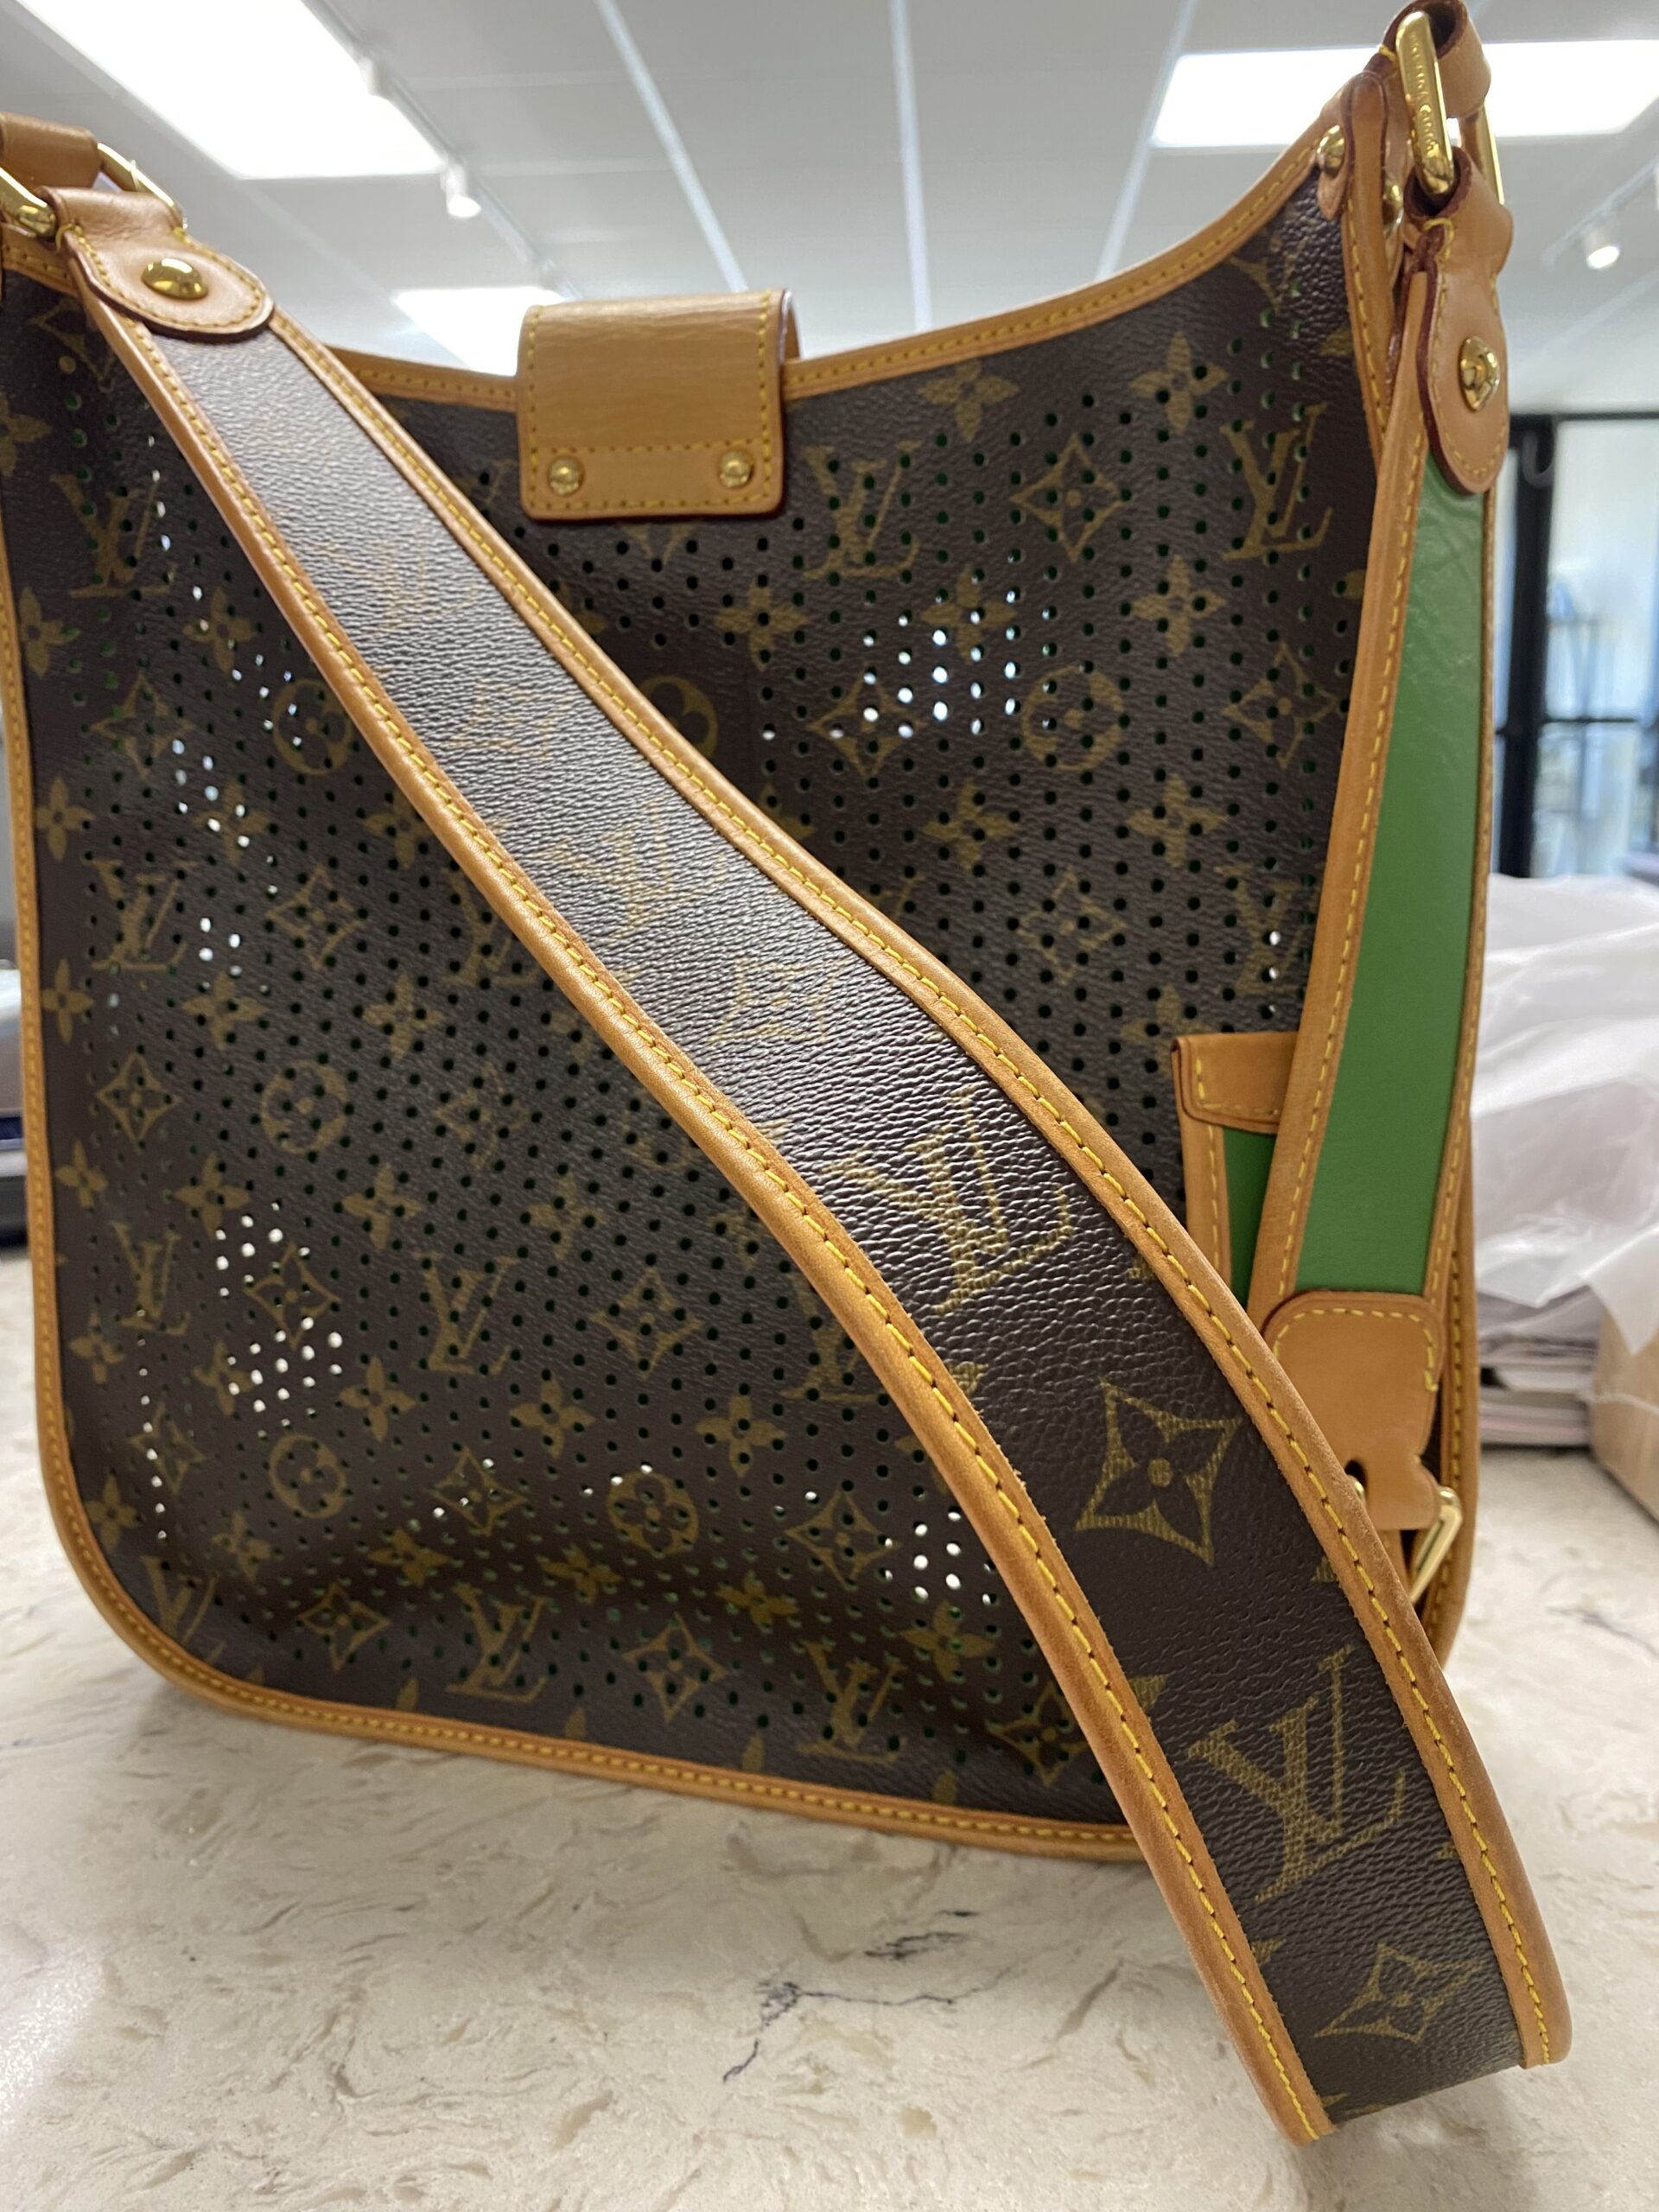 LOUIS VUITTON Monogram Perforated Musette Green Bag Limited Edition